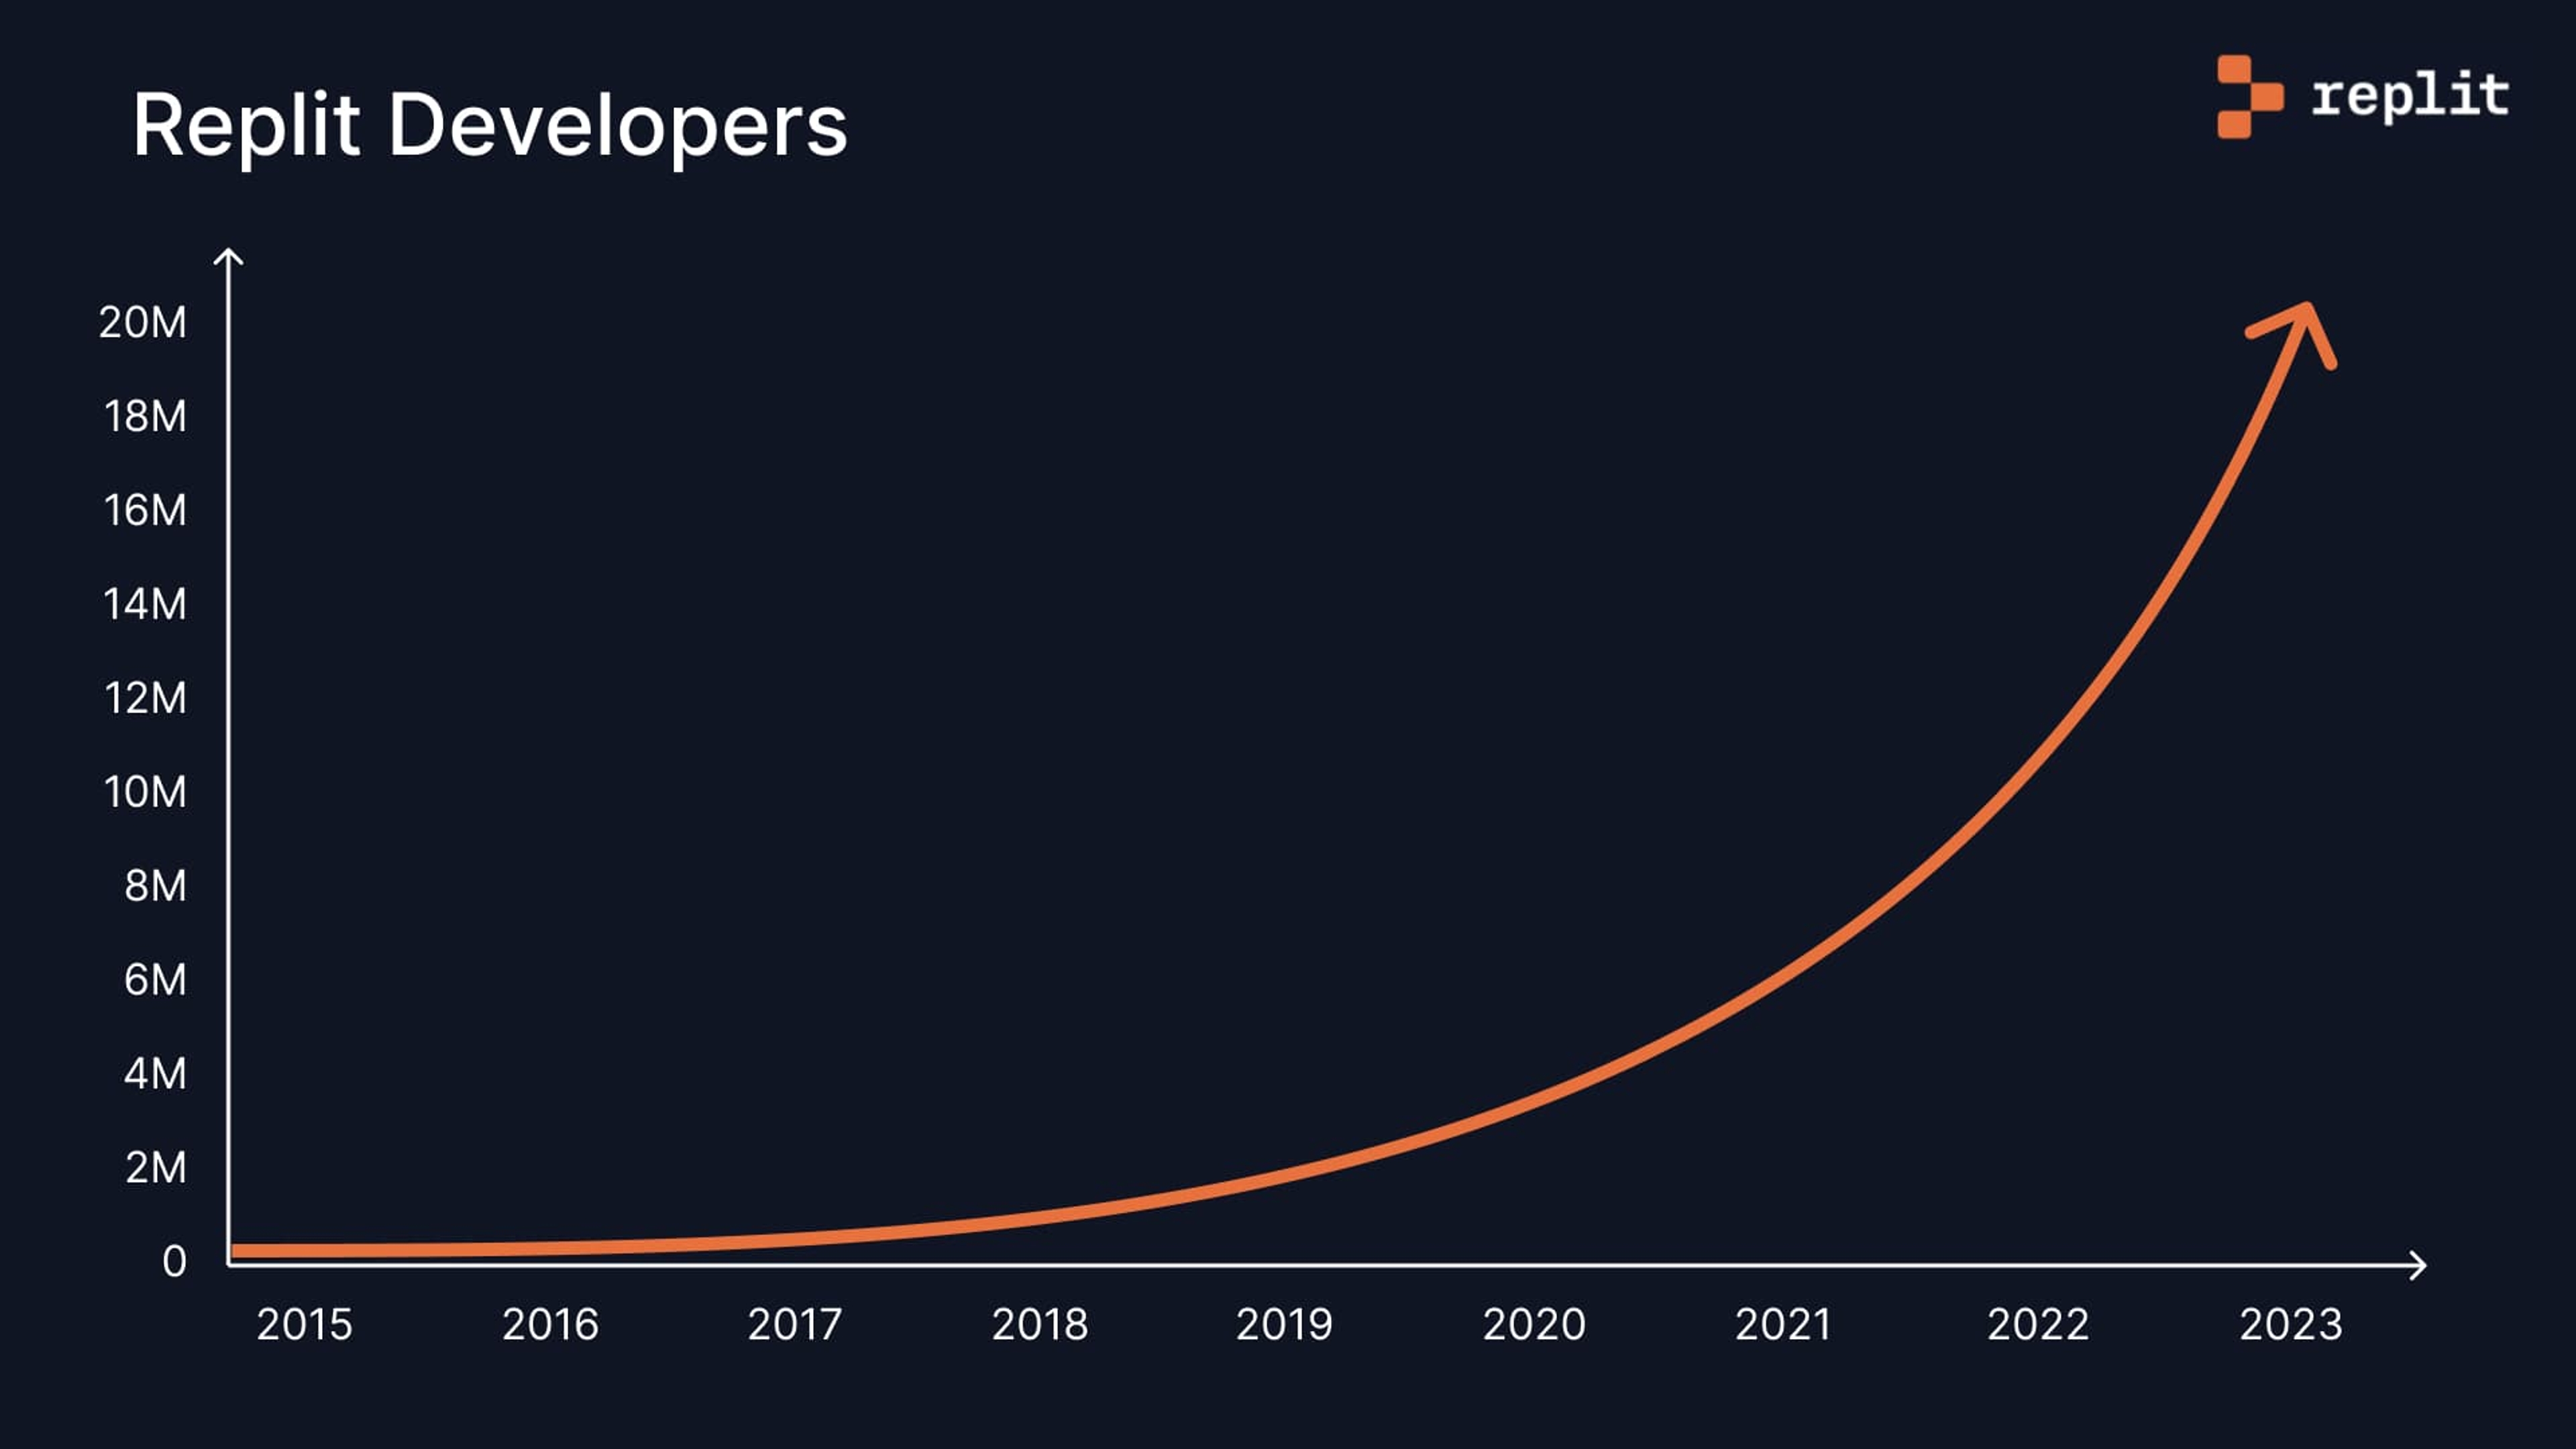 chart of replit developer growth 2015 to 2023